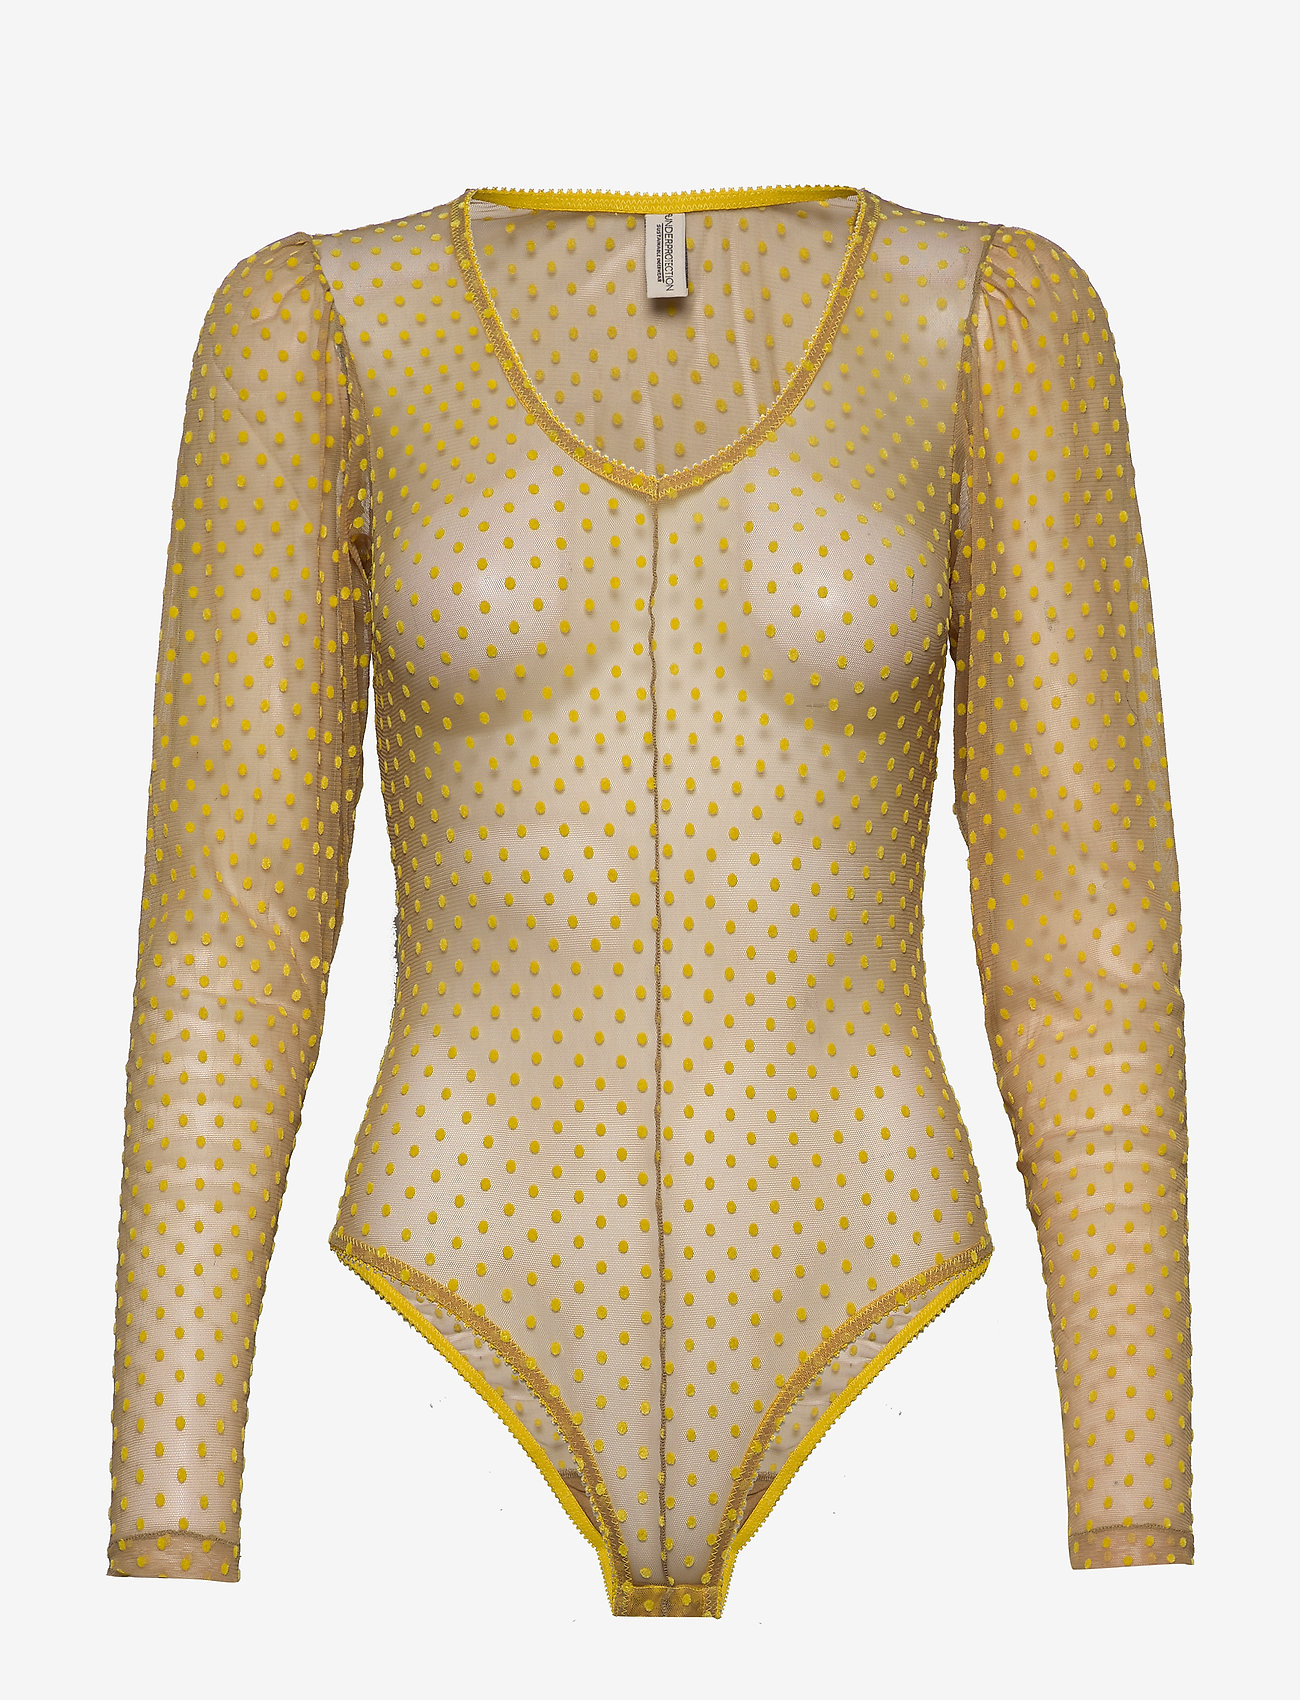 Underprotection - Donna bodystocking - moterims - yellow - 0